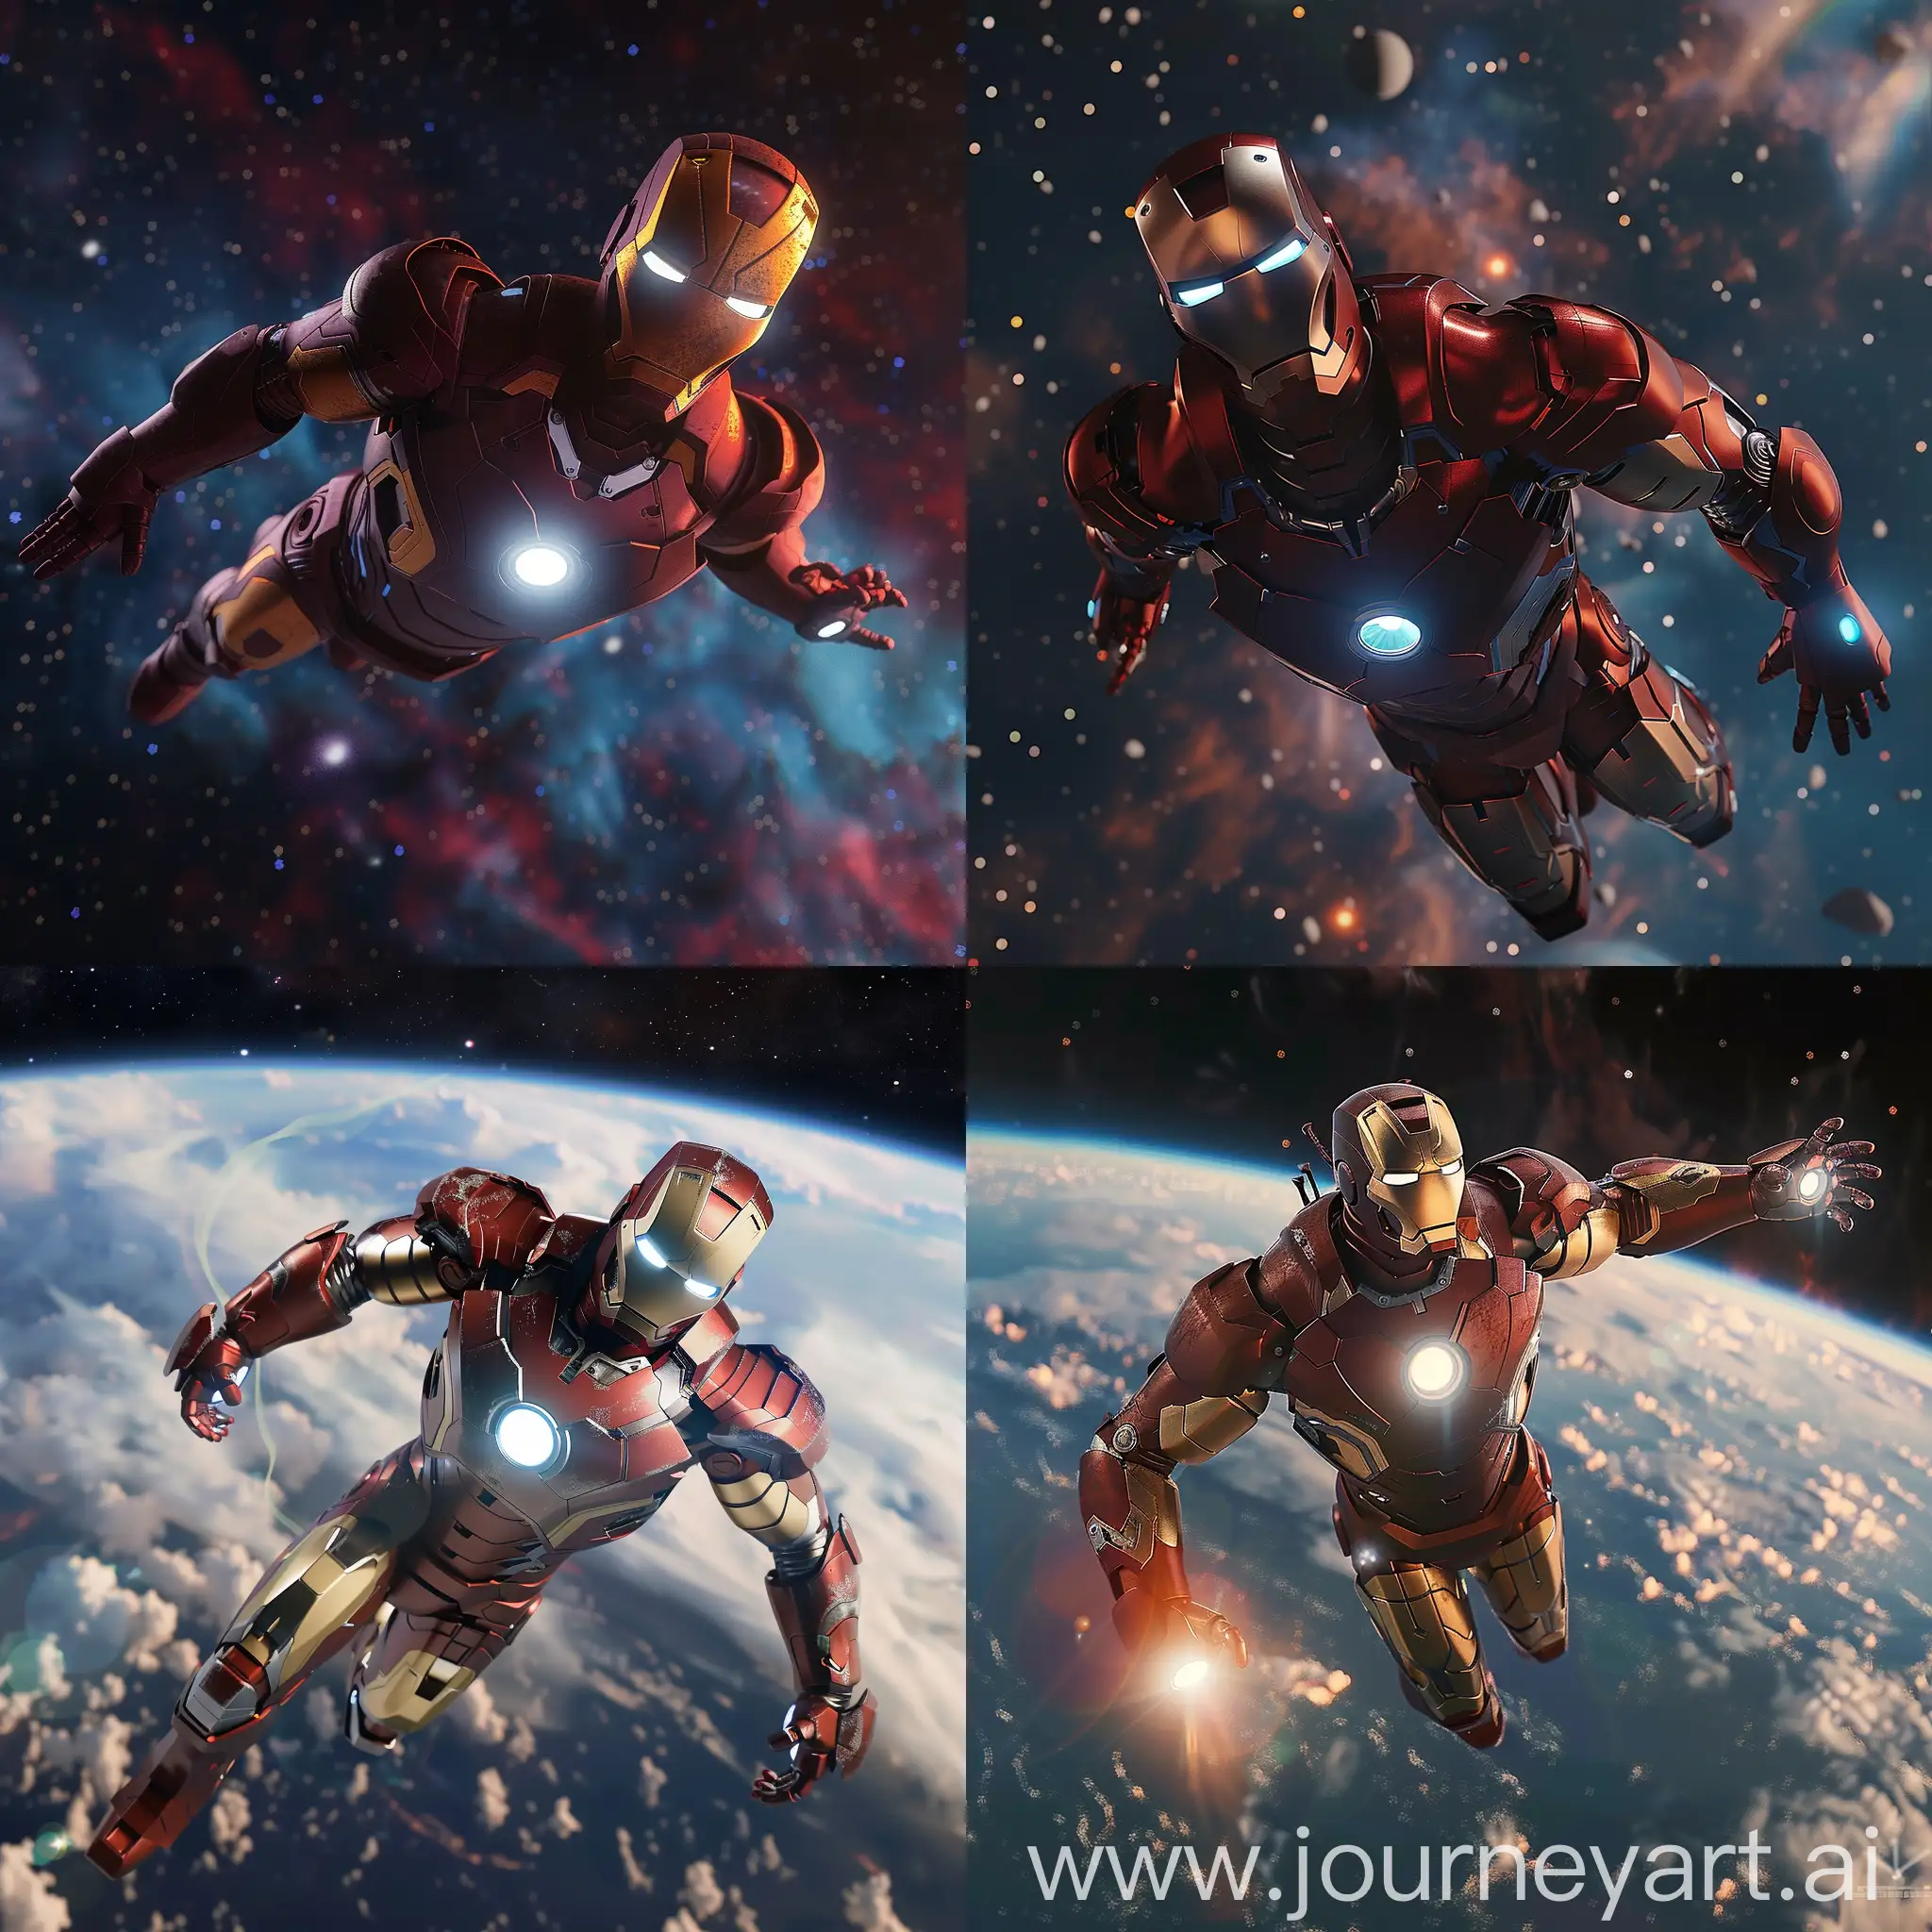 Dynamic-3D-Ironman-Flying-to-Space-Artwork